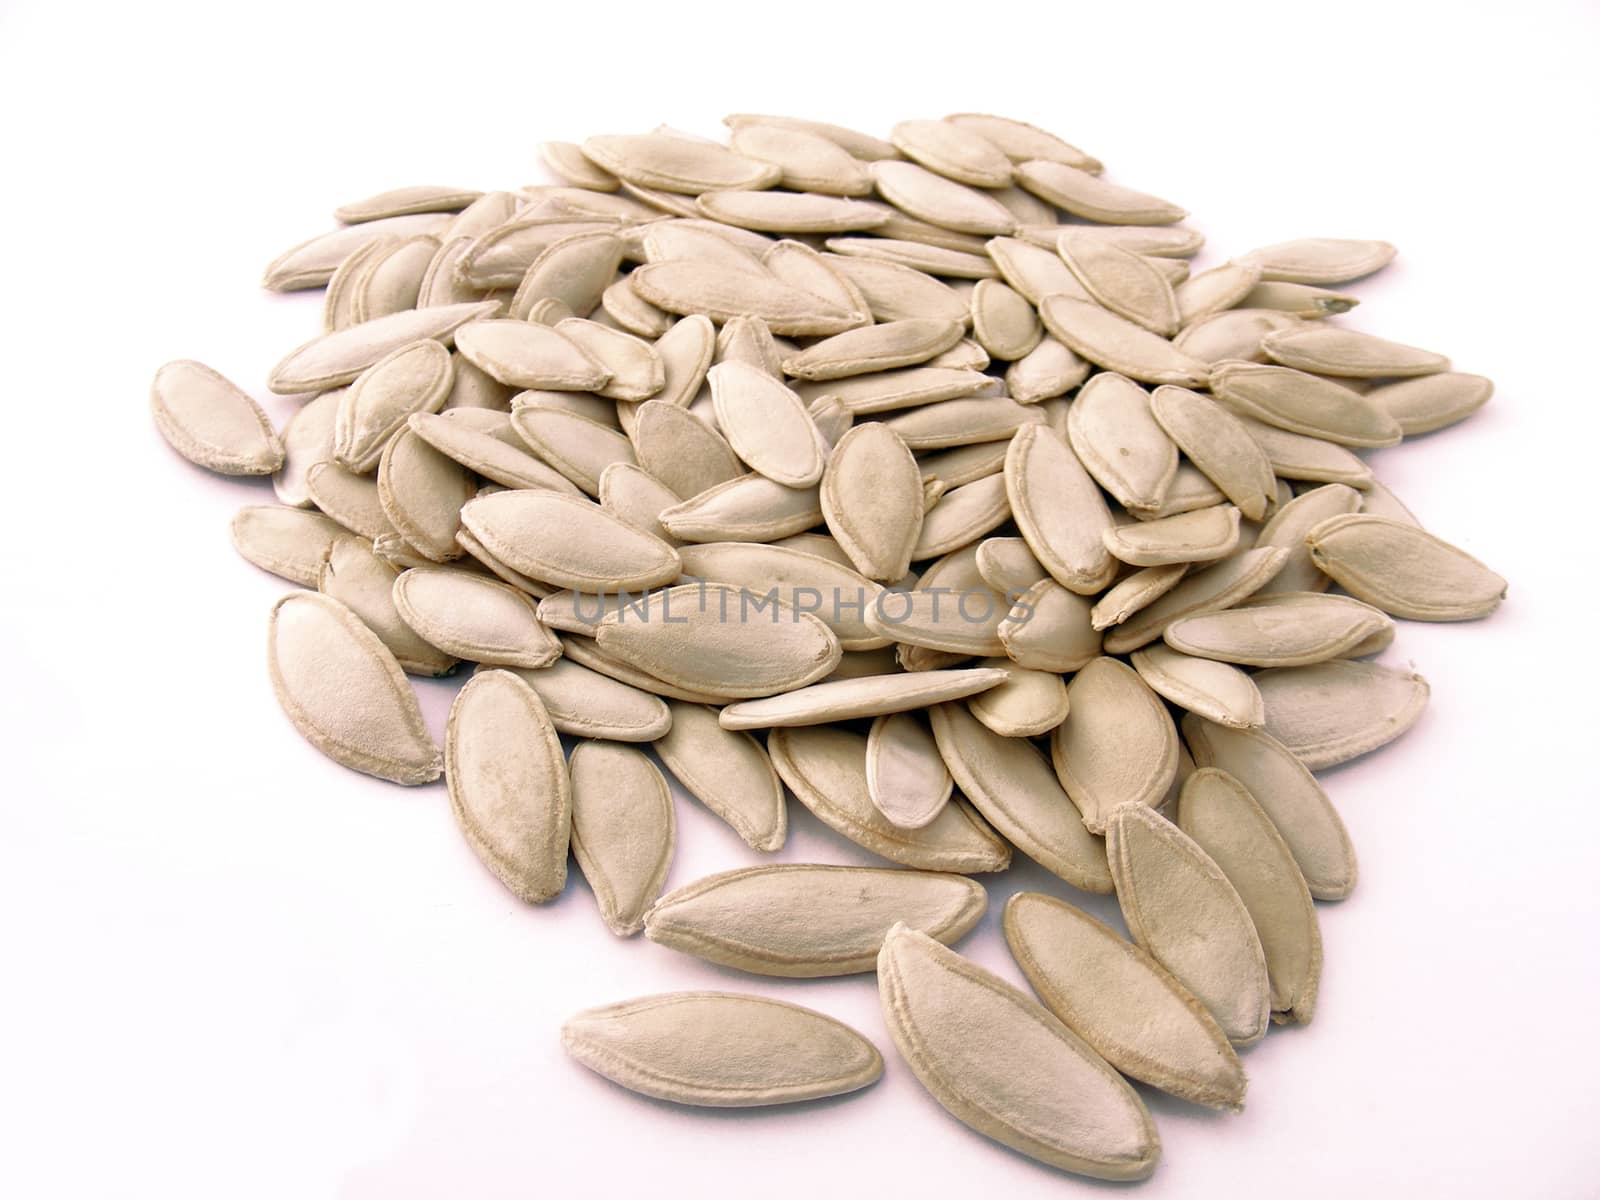 Pictures of the most beautiful and fresh pumpkin seeds